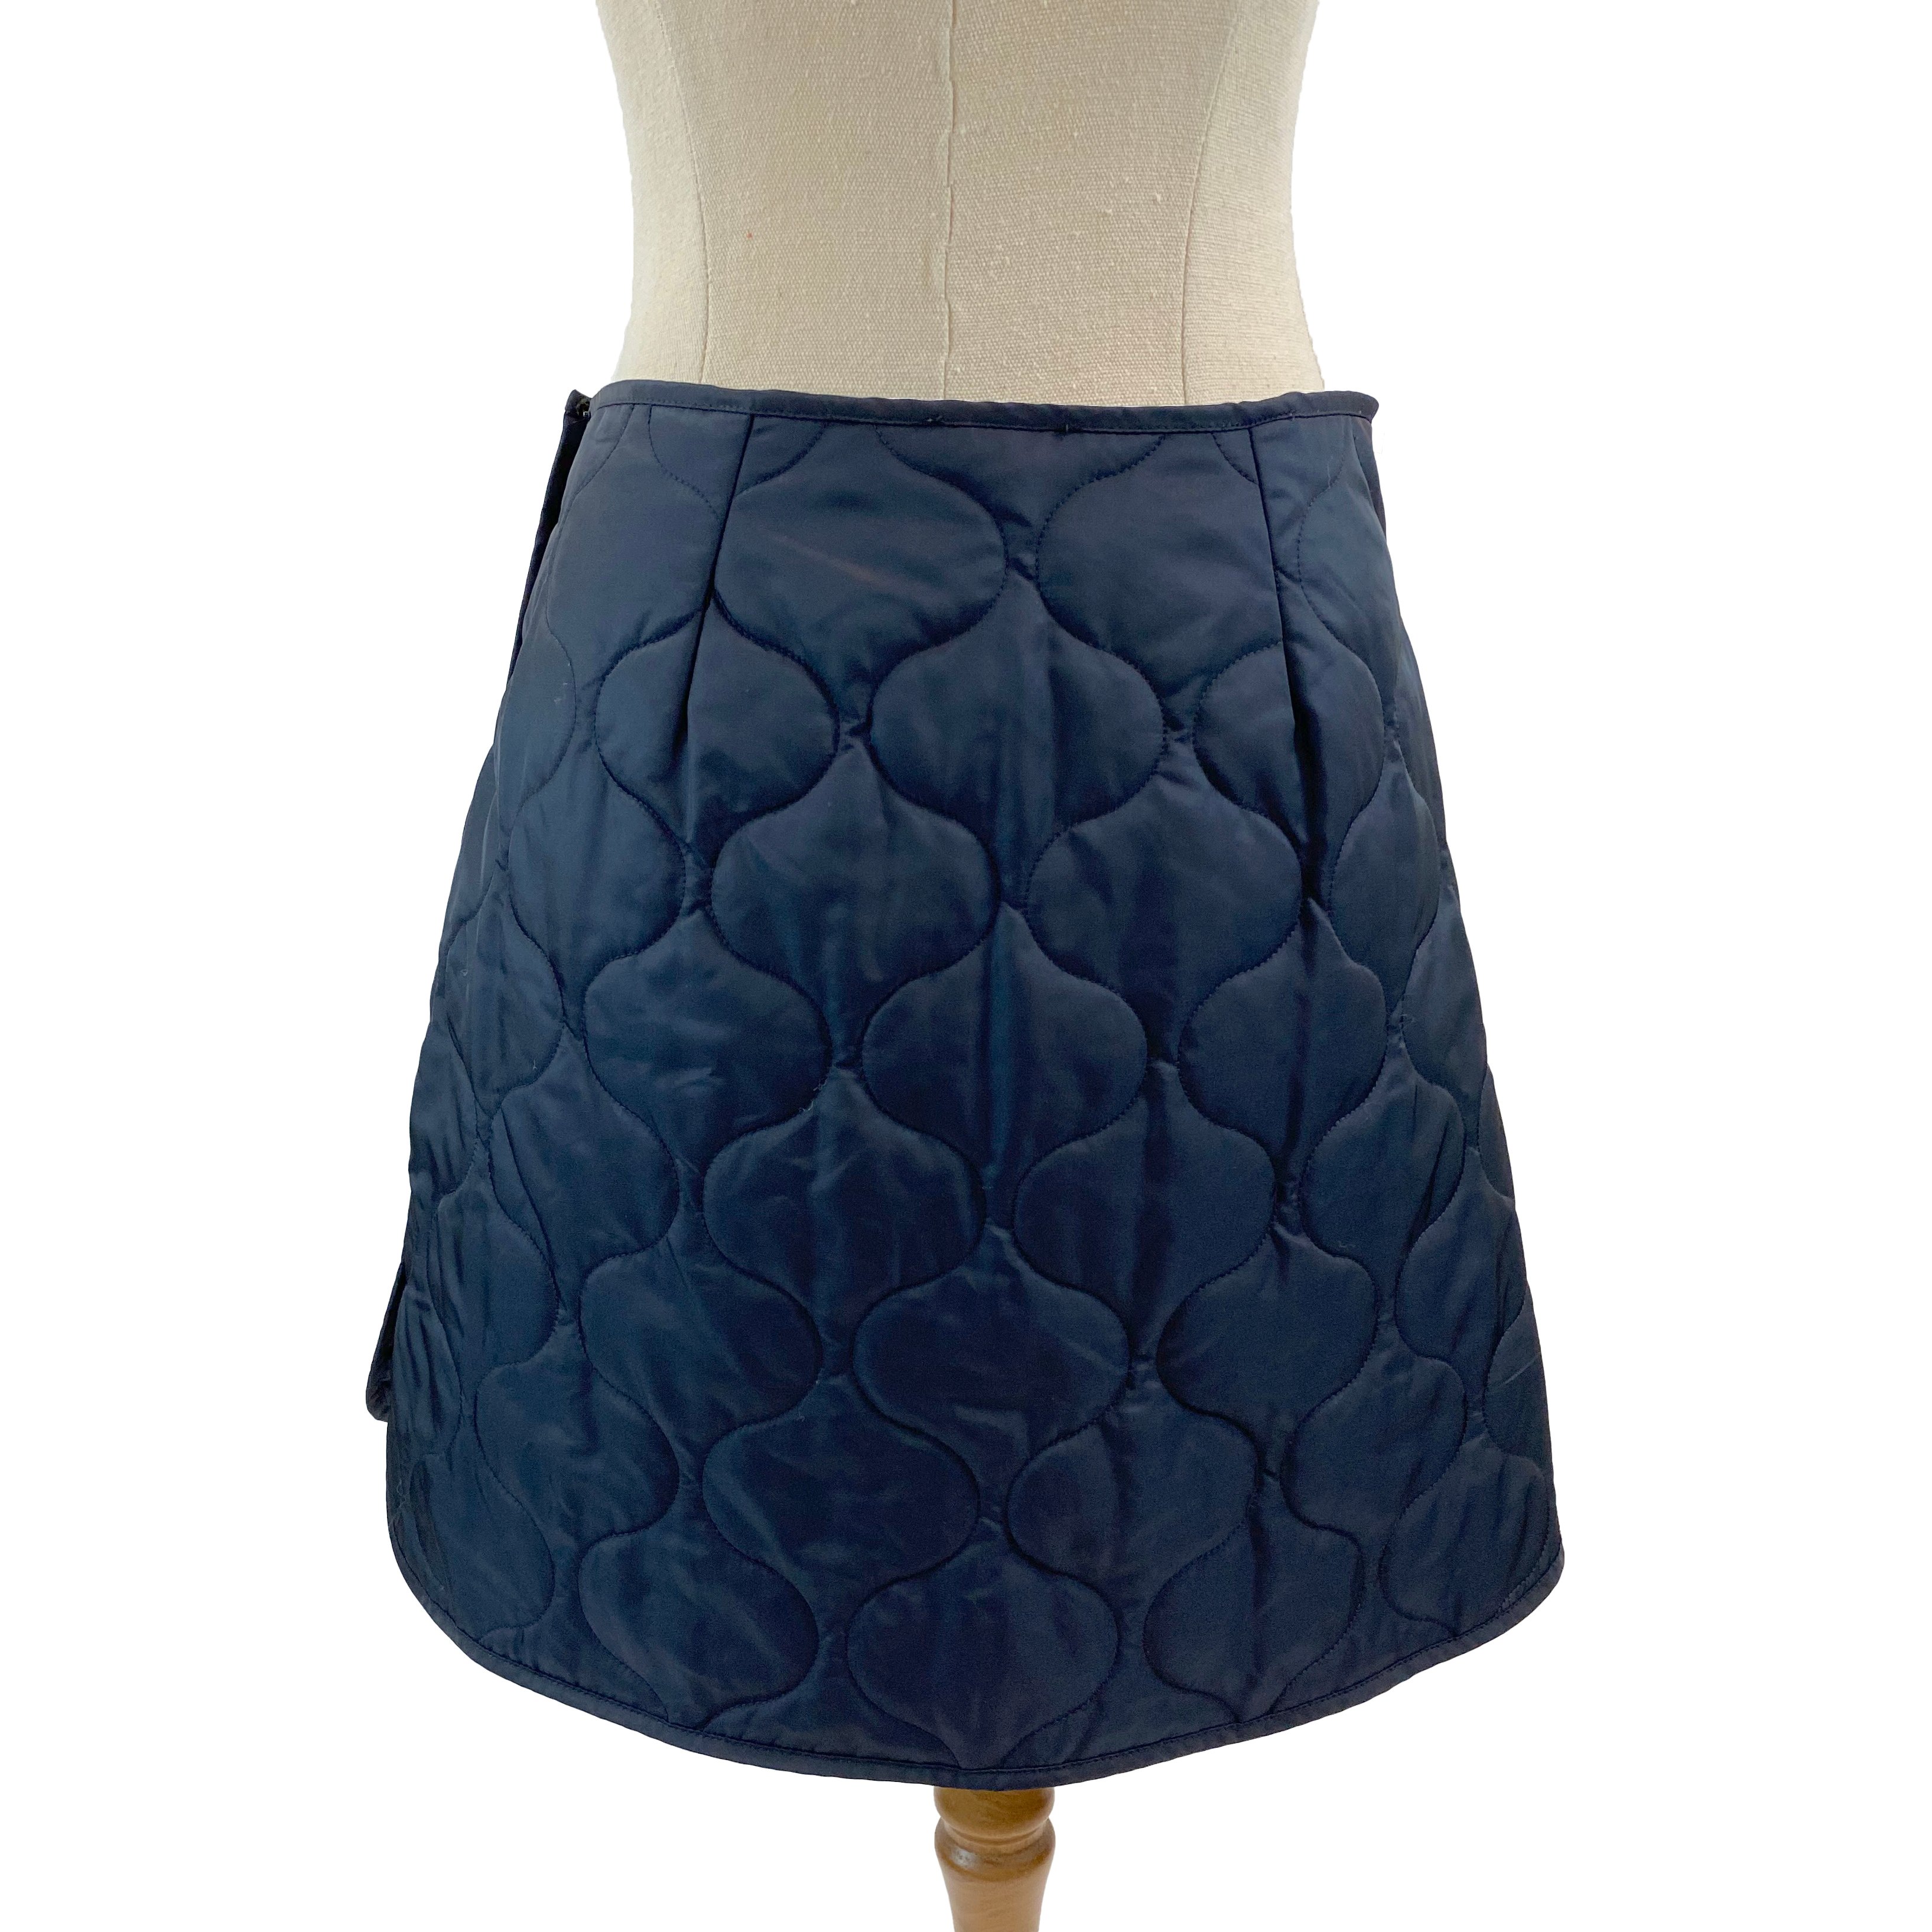 Sonia Rykiel Quilted Skirt